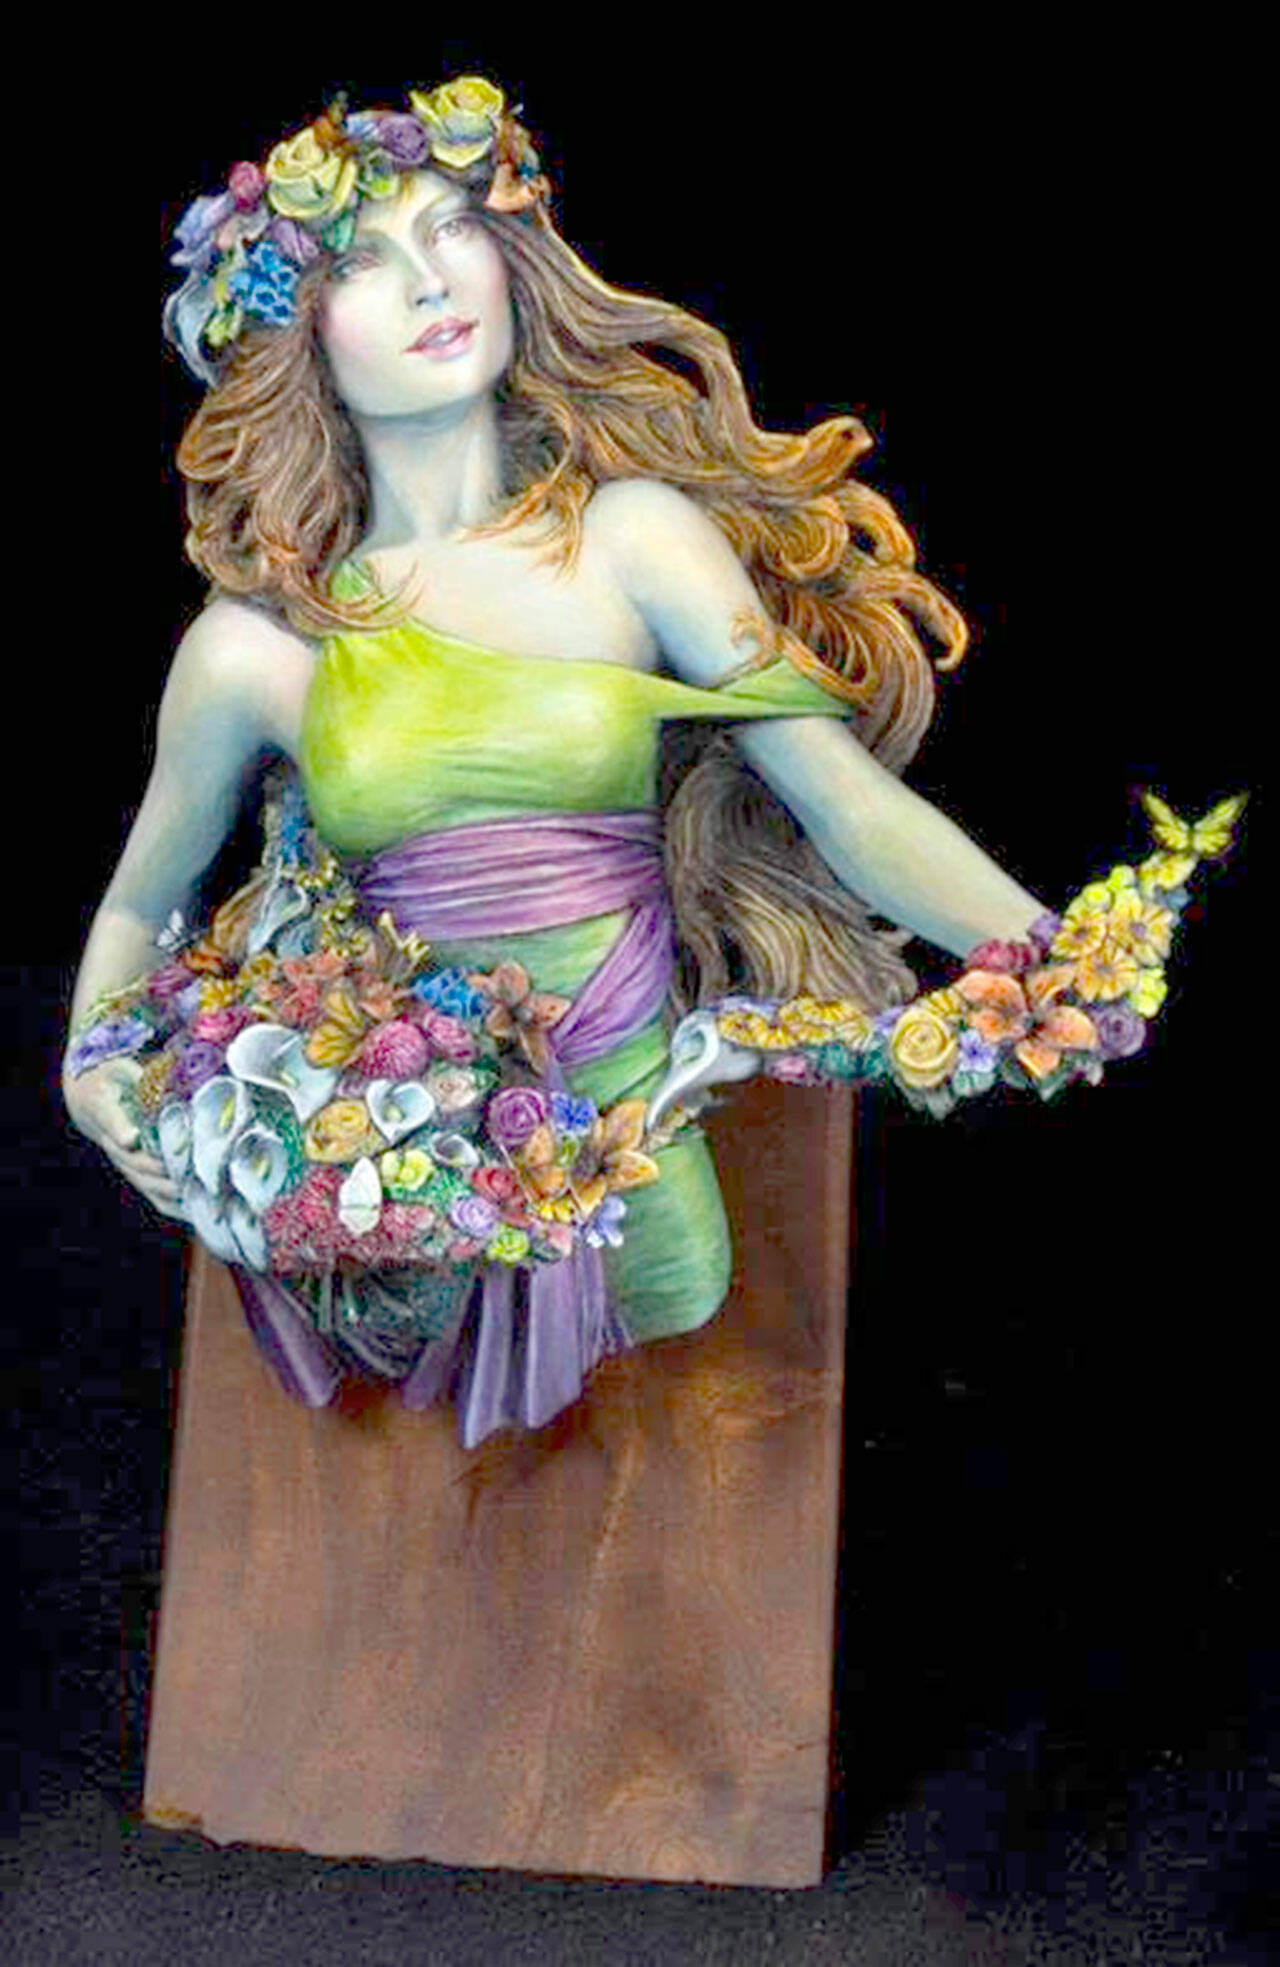 “Spirit of Spring” by Matt DiPietro is among artwork on display at the Jefferson Museum of Art & History.